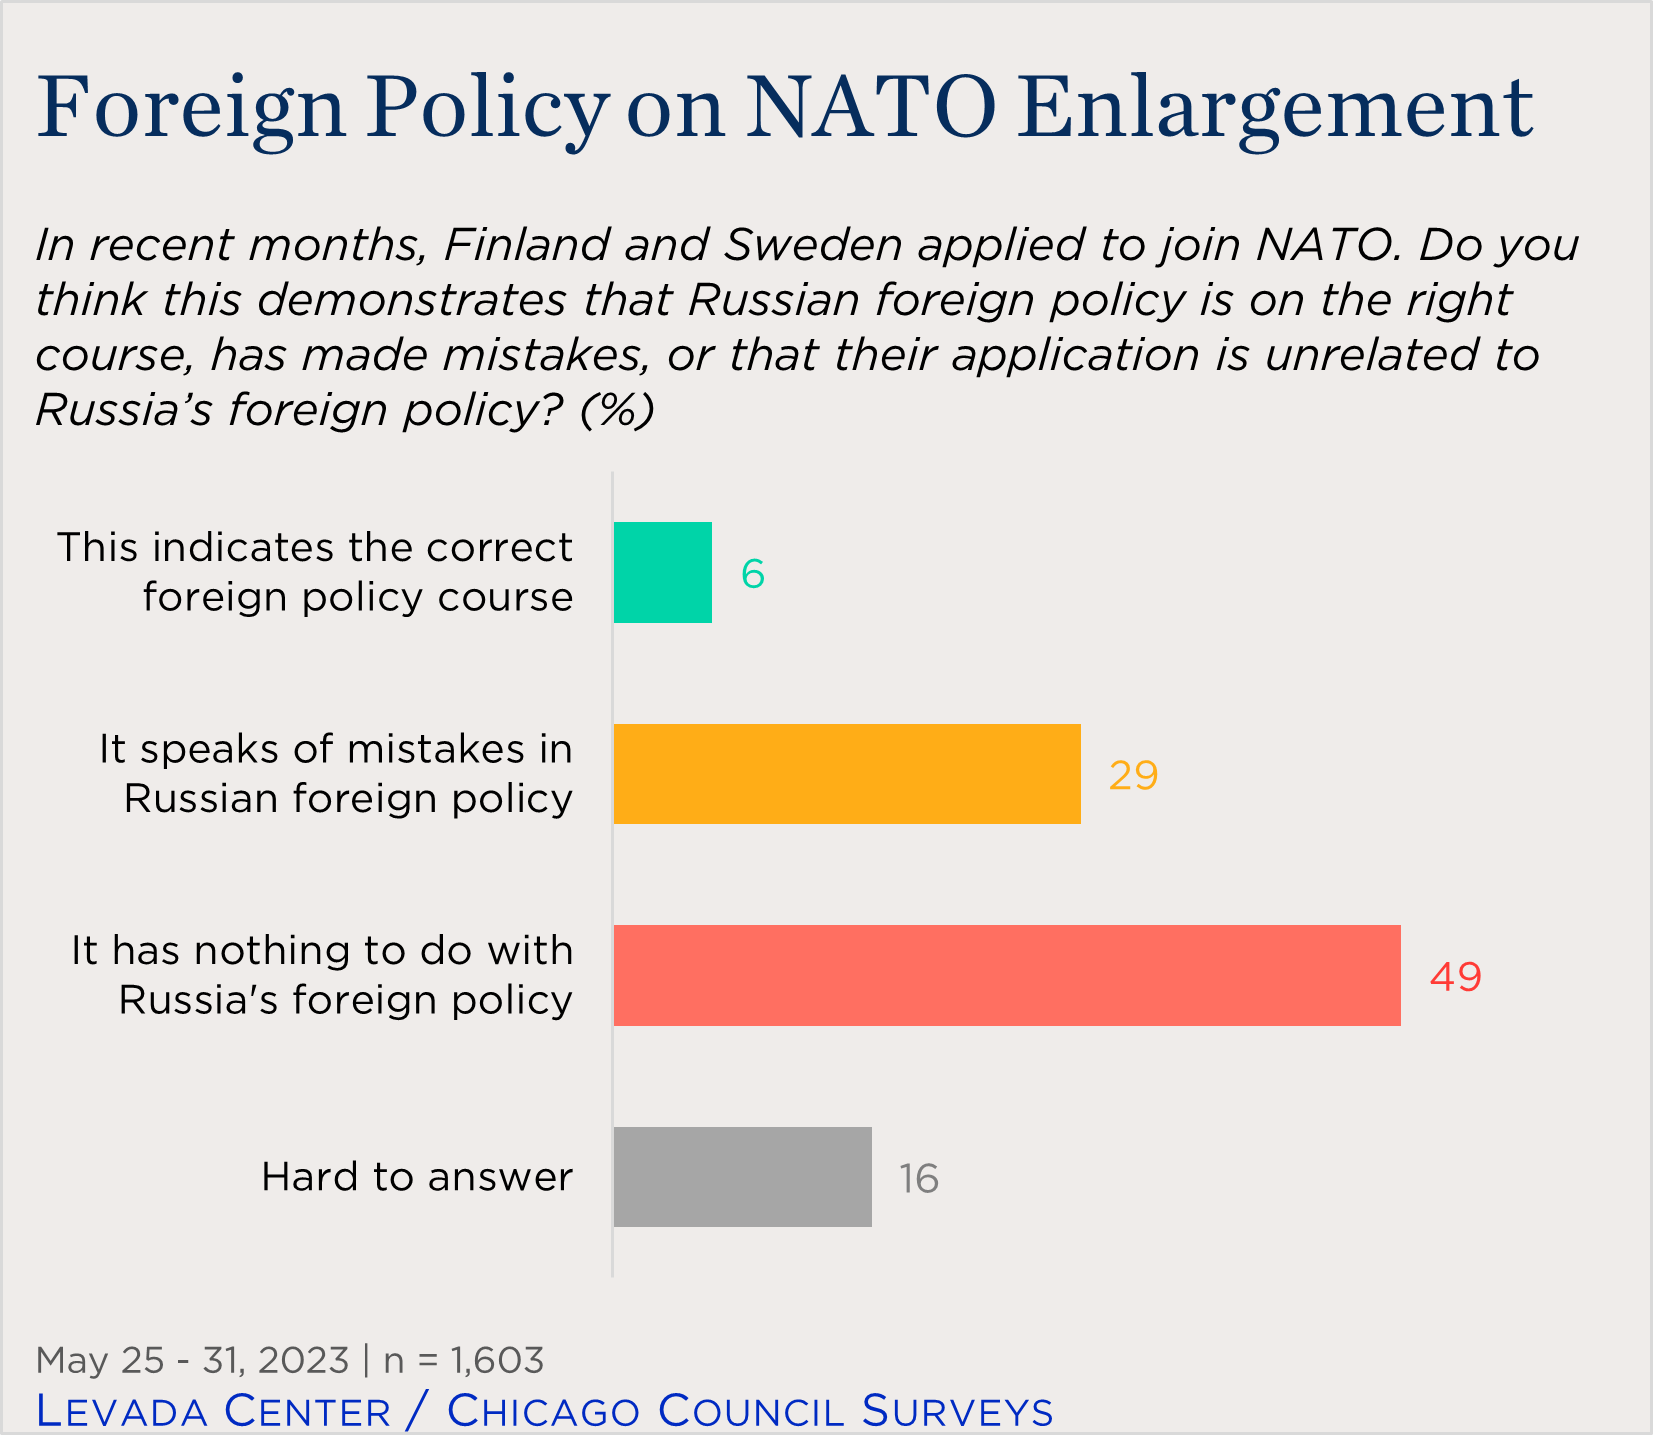 "bar chart showing views of Russian foreign policy impact on Finland and Sweden trying to join NATO"